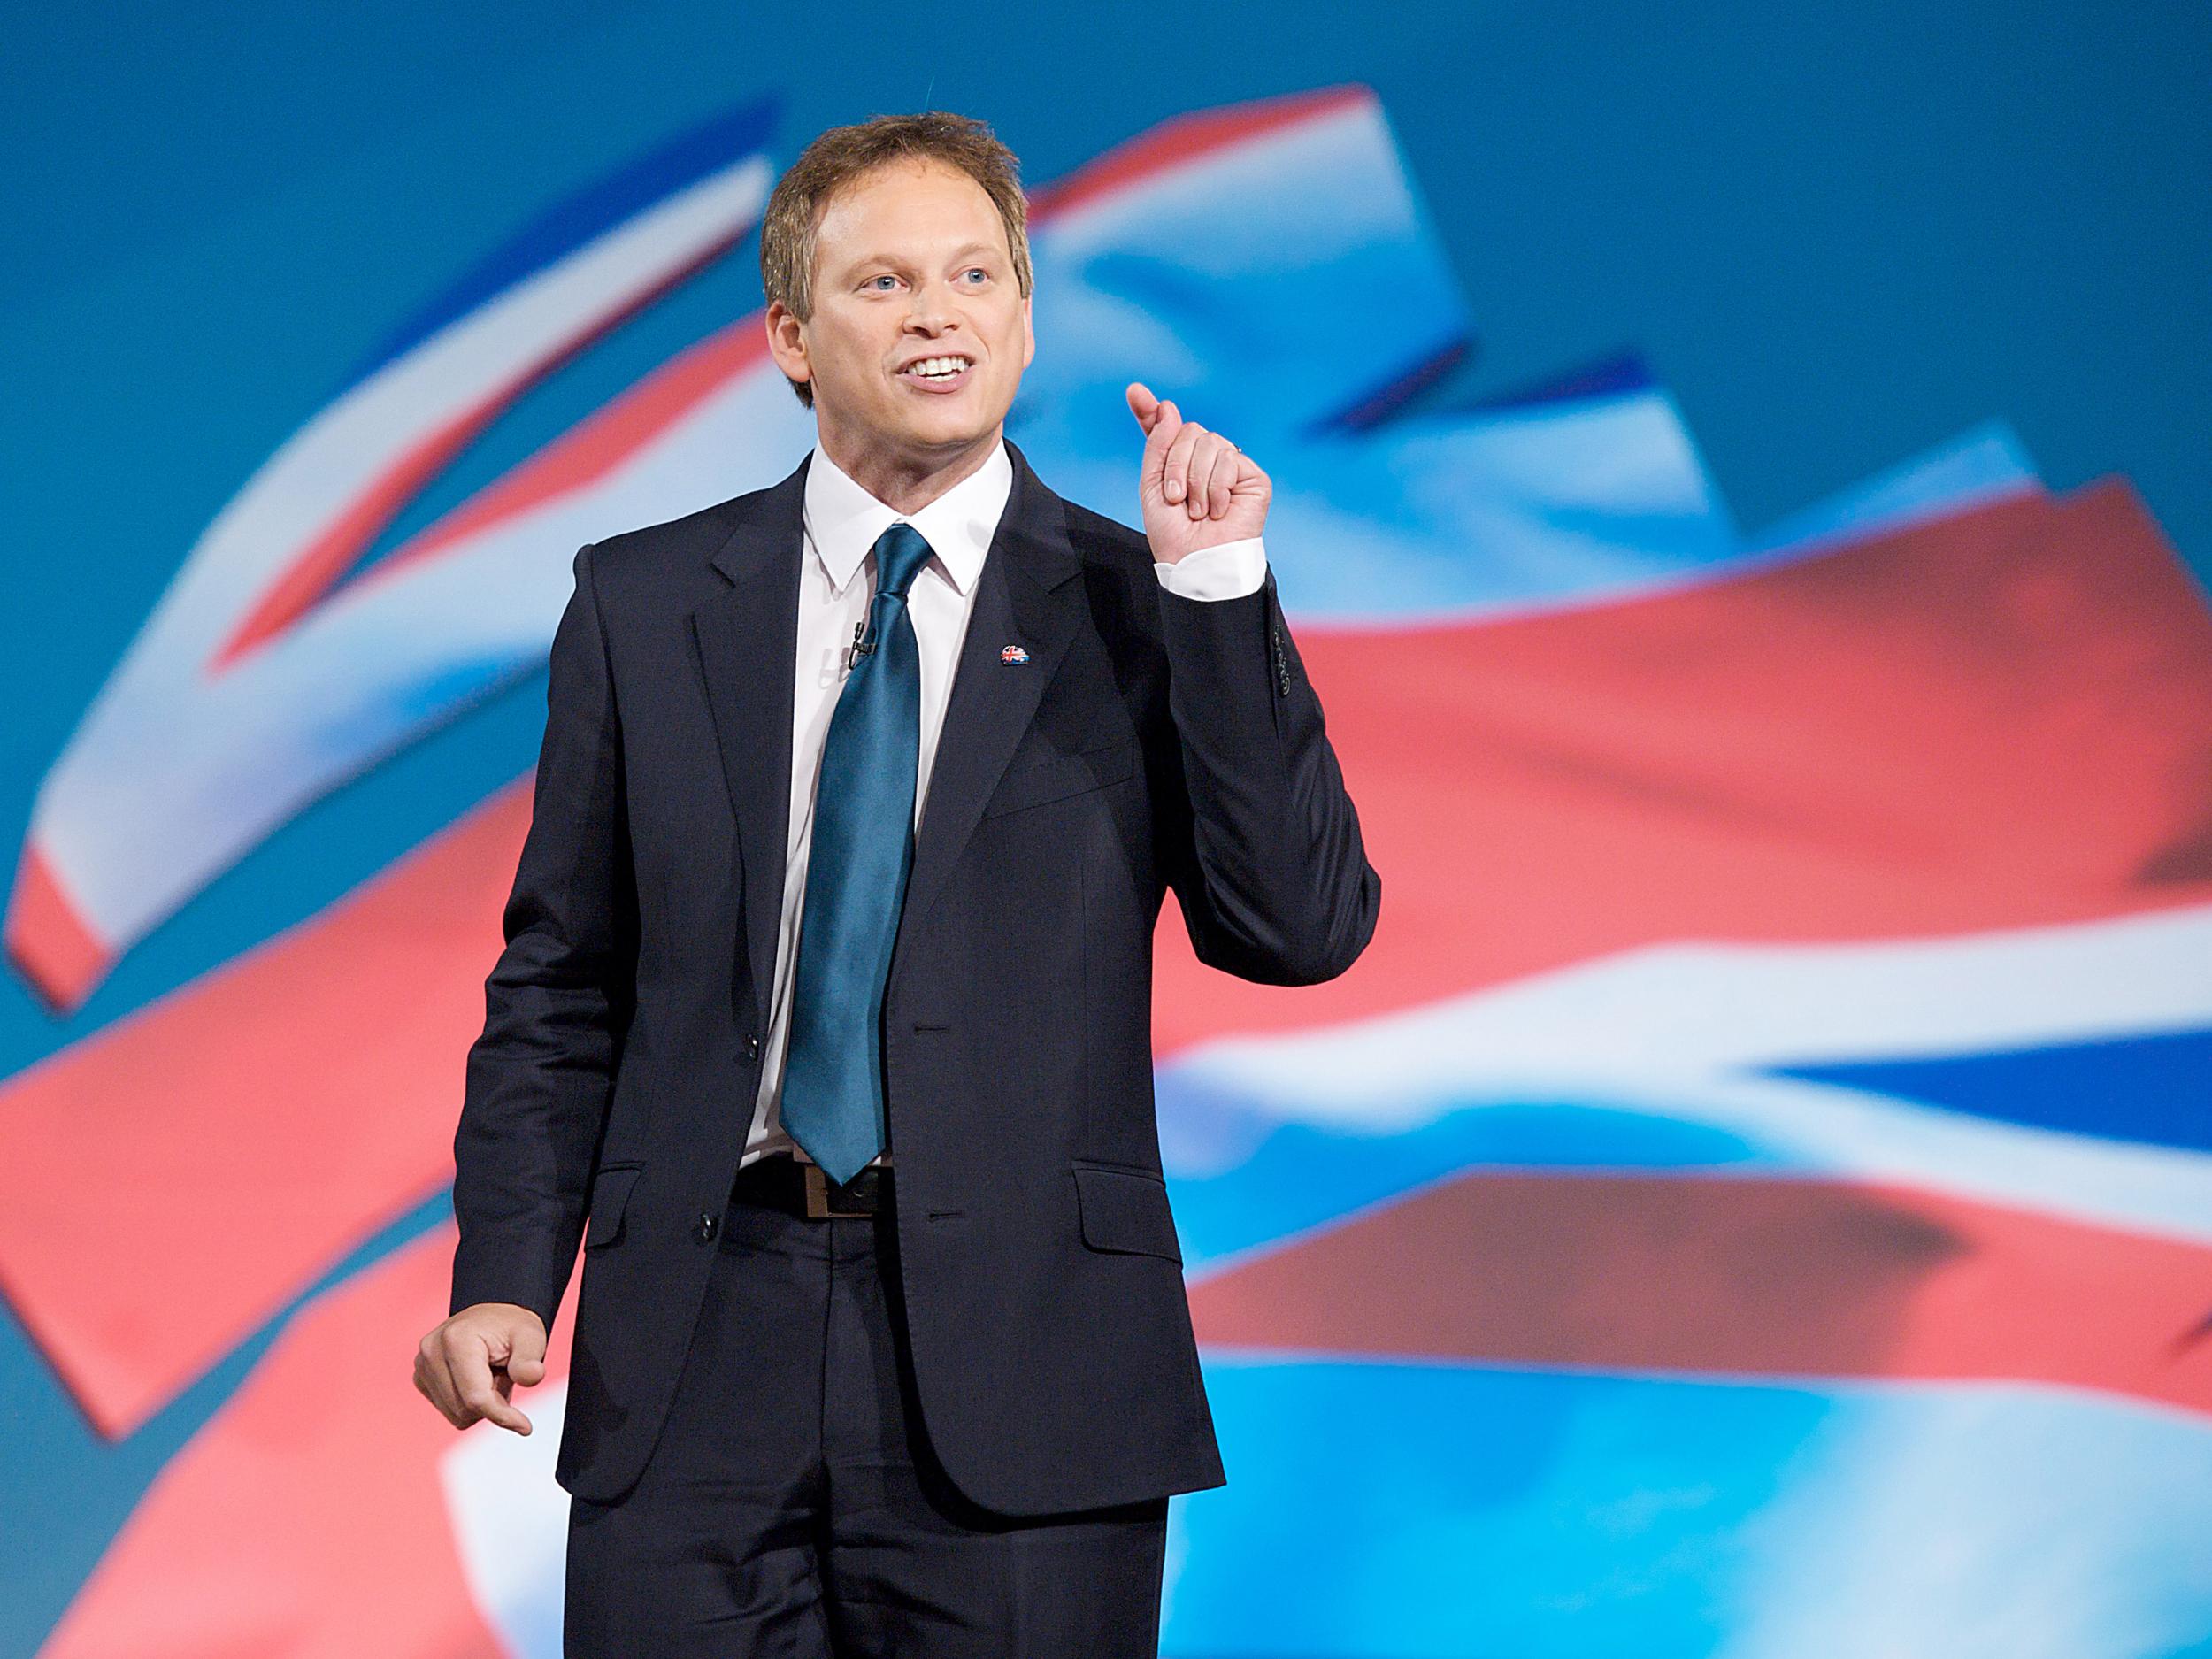 Grant Shapps was told to ‘shut up’ by Andrea Leadsom